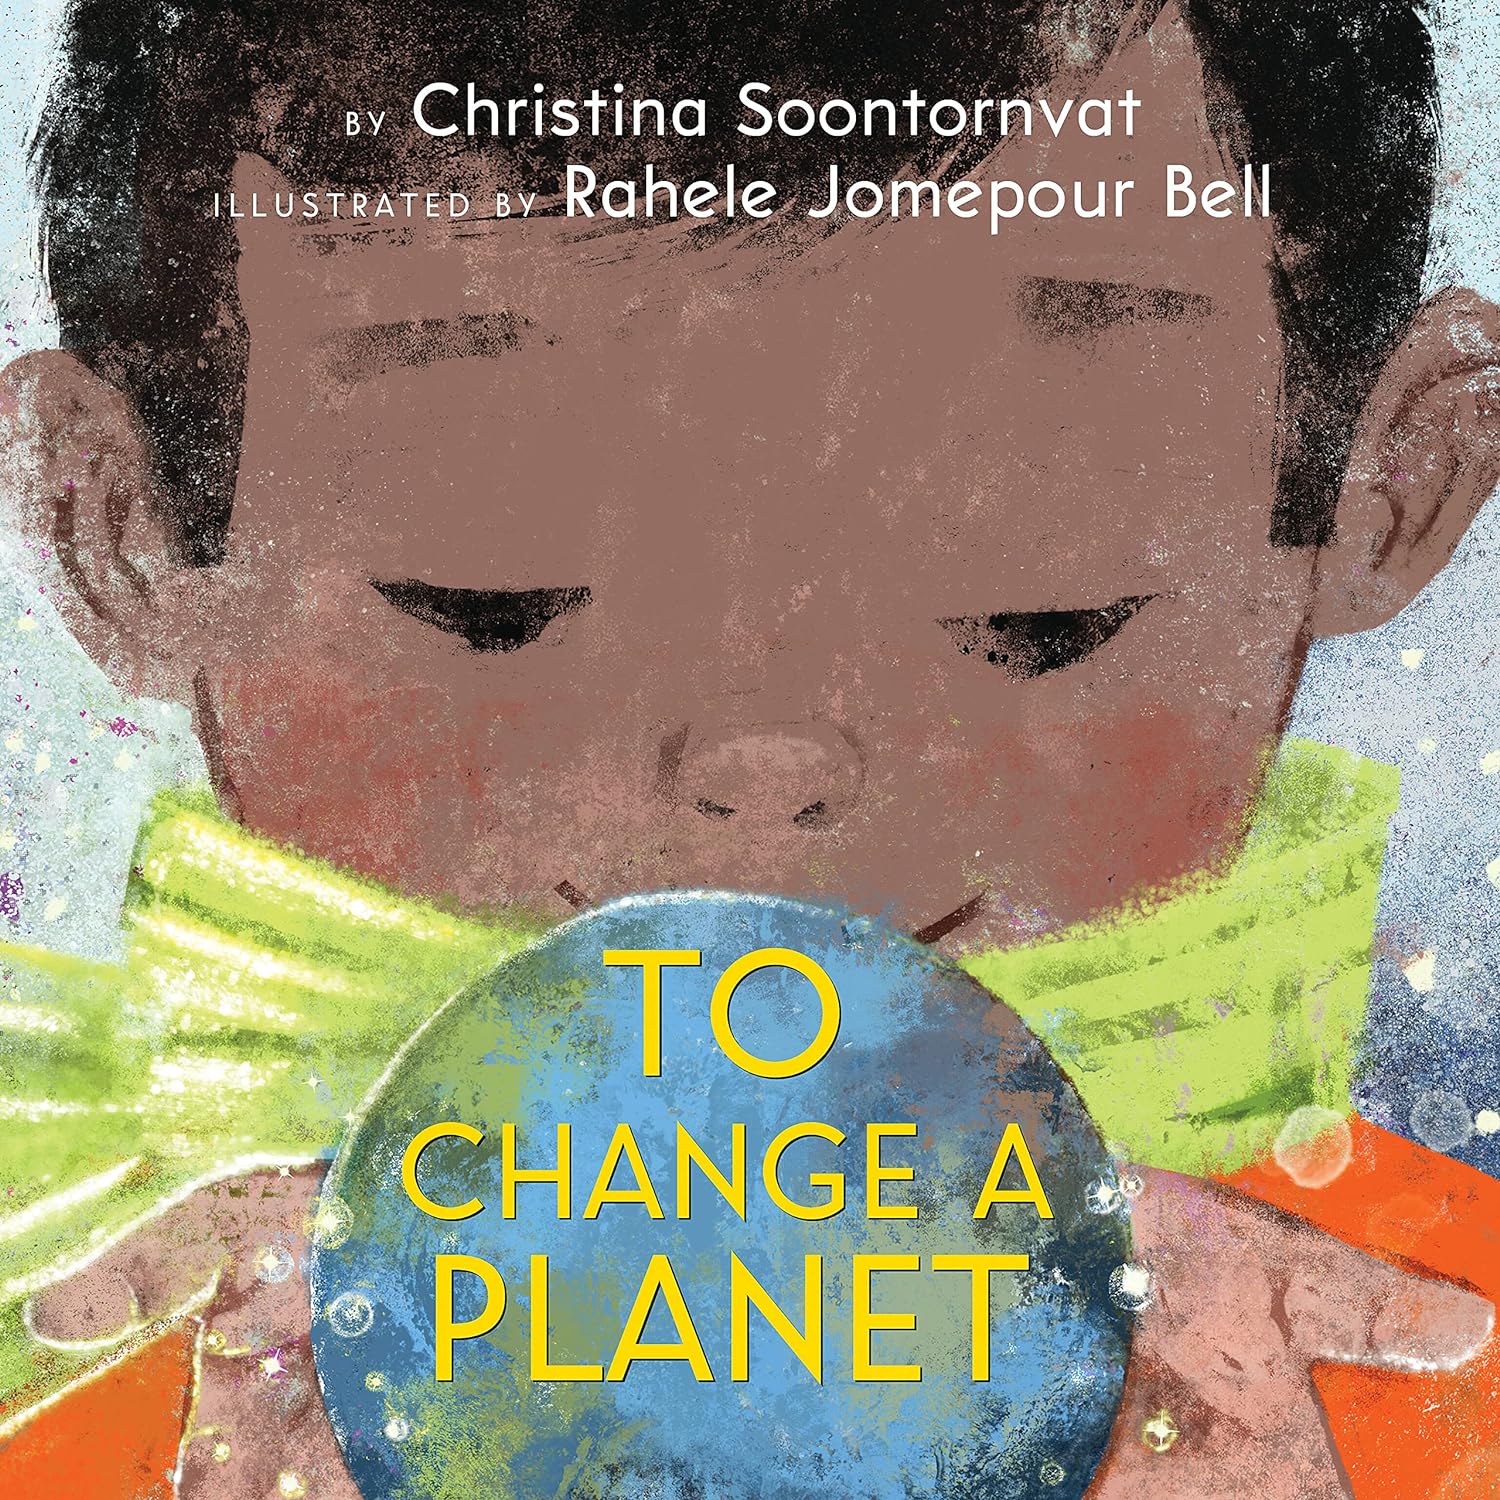 To Change a Planet (book cover)